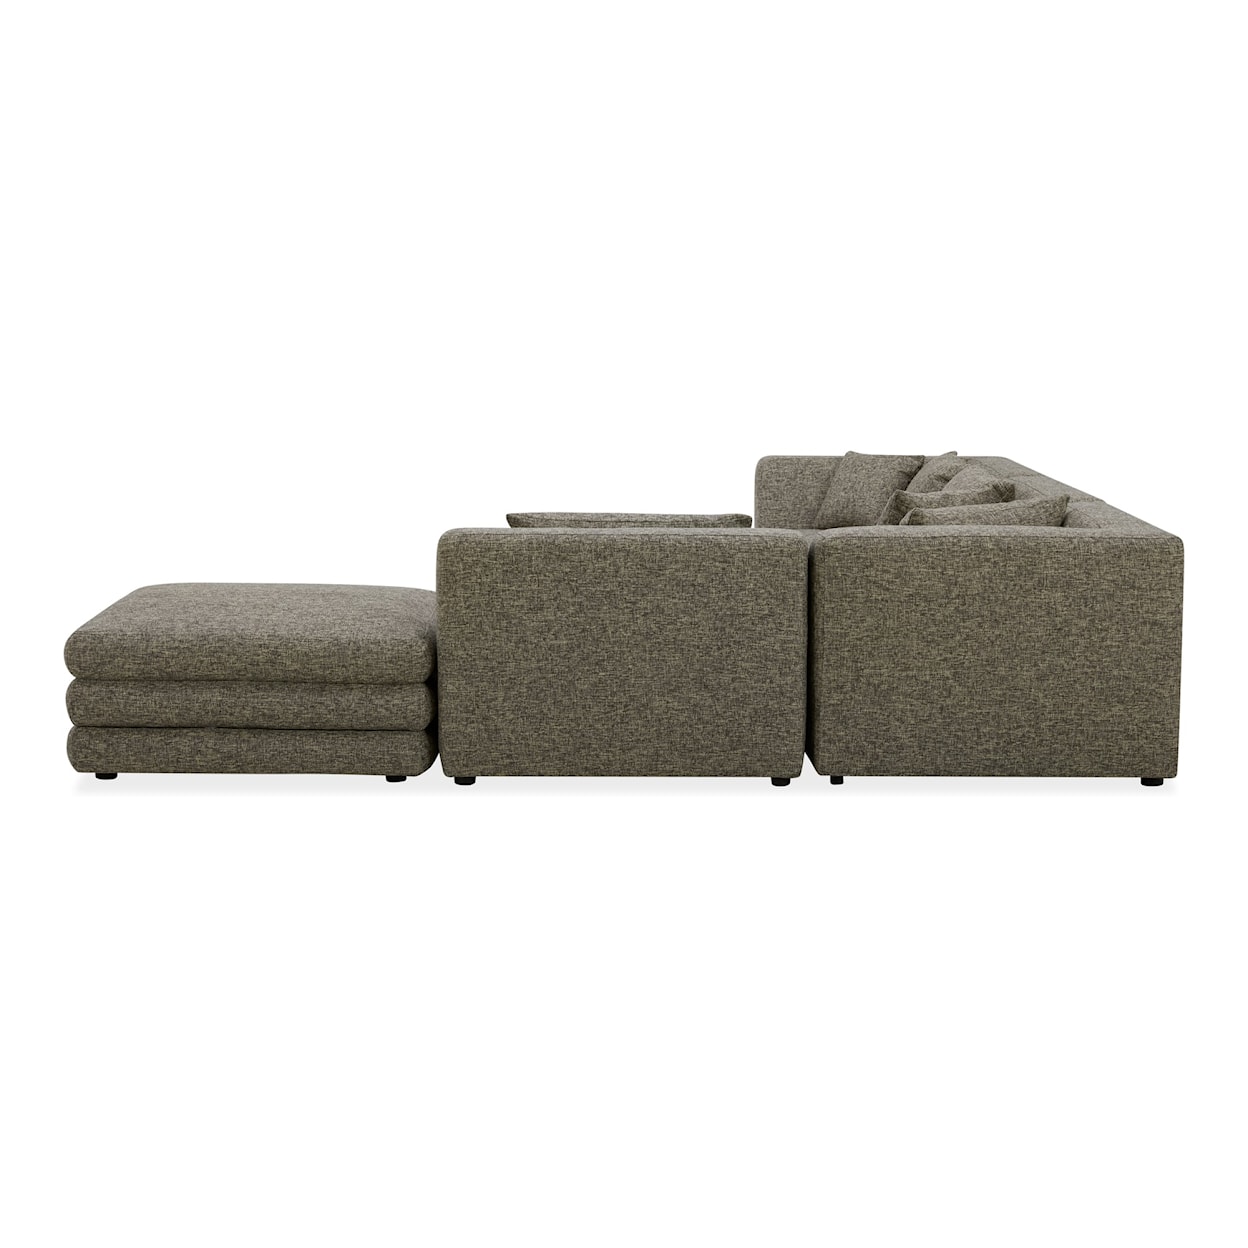 Moe's Home Collection Lowtide 5-Piece Sectional Sofa